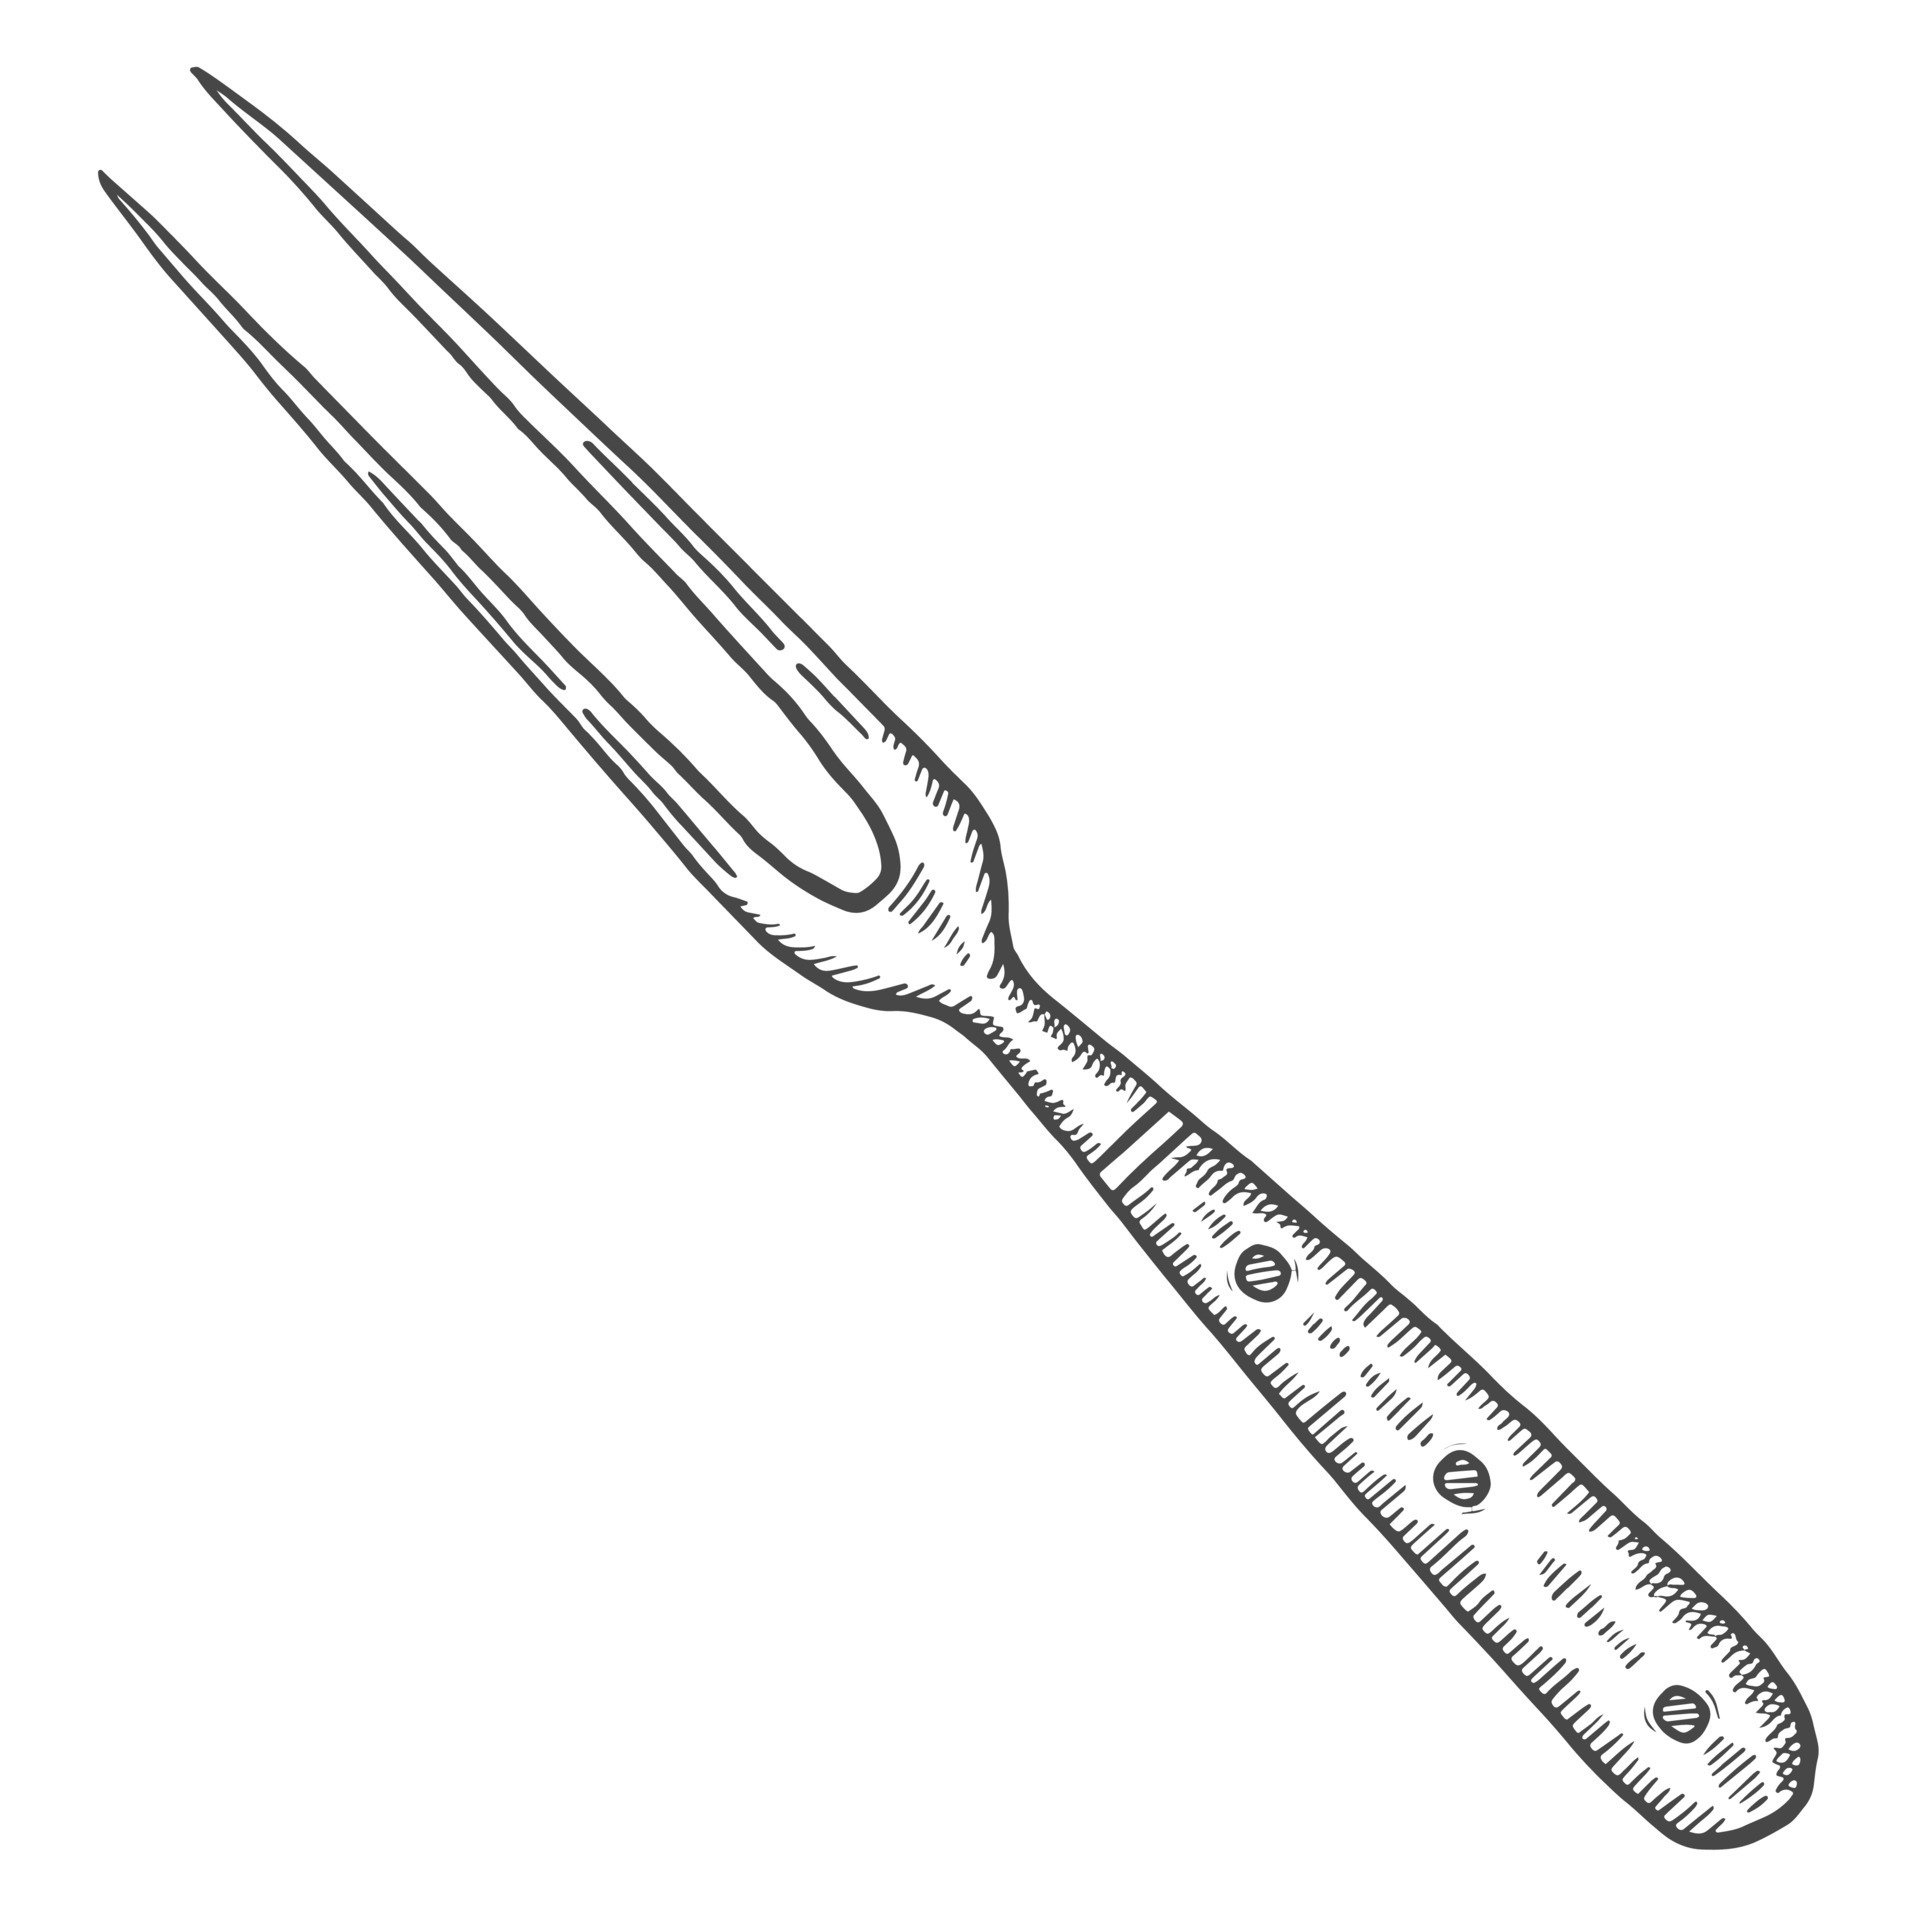 Fork Knife And Spoon drawing free image download